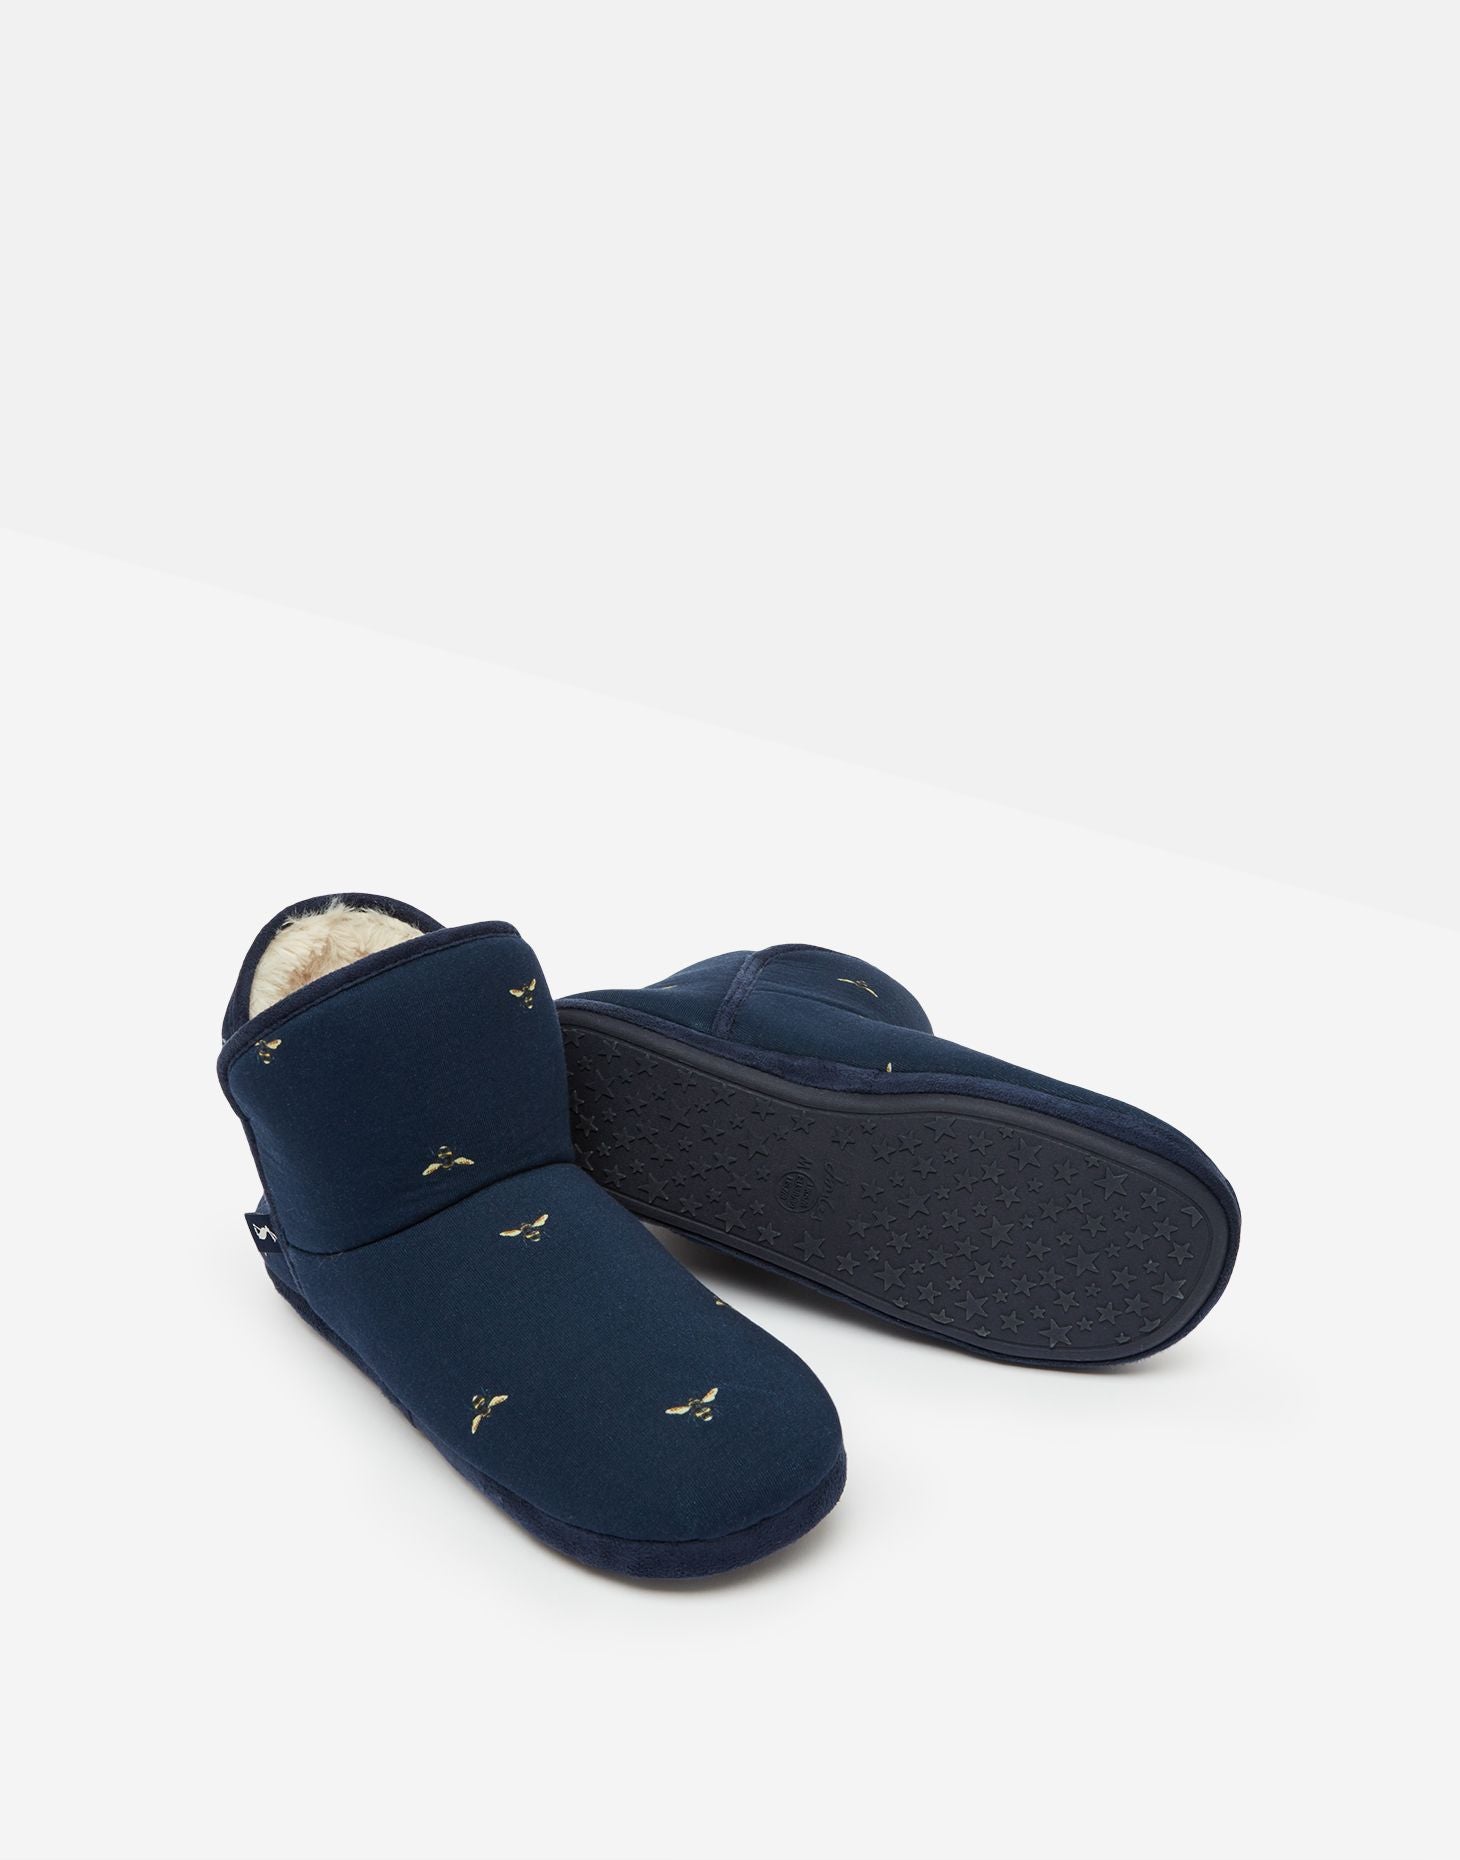 Women's Cabin Faux Fur Lined Slippers - Navy Bees